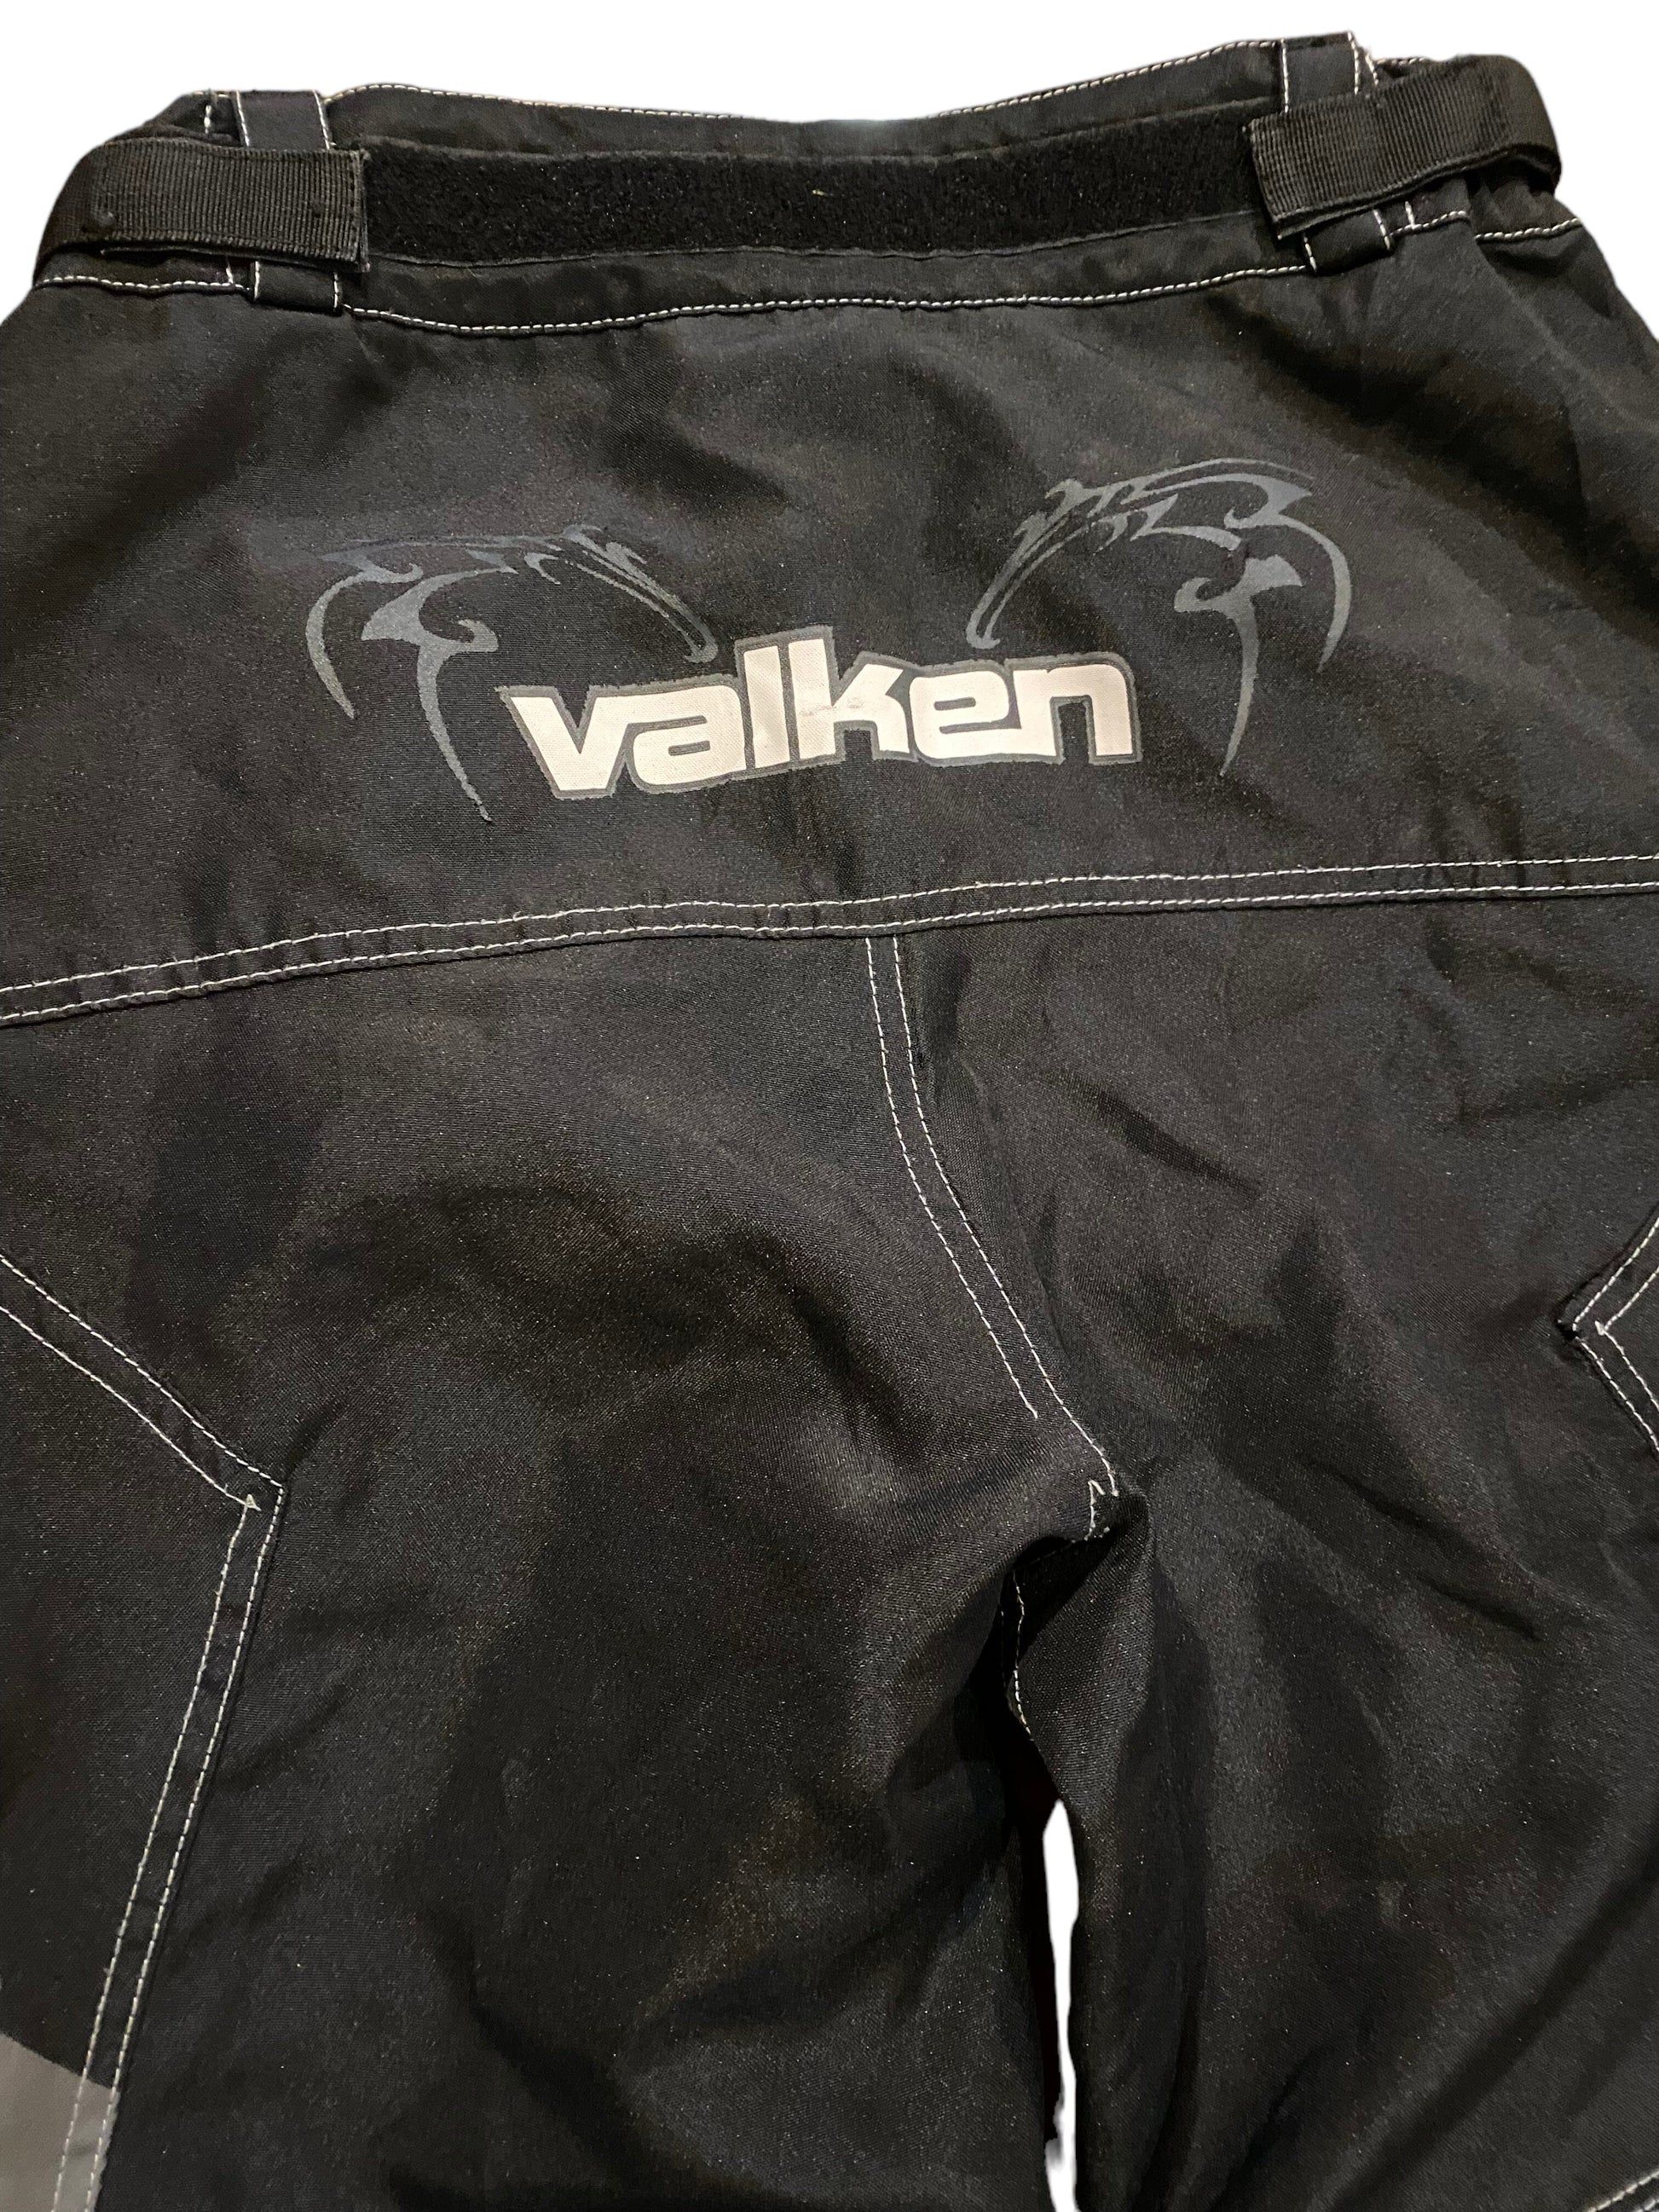 Used Valken Paintball Pants - size Small Paintball Gun from CPXBrosPaintball Buy/Sell/Trade Paintball Markers, Paintball Hoppers, Paintball Masks, and Hormesis Headbands